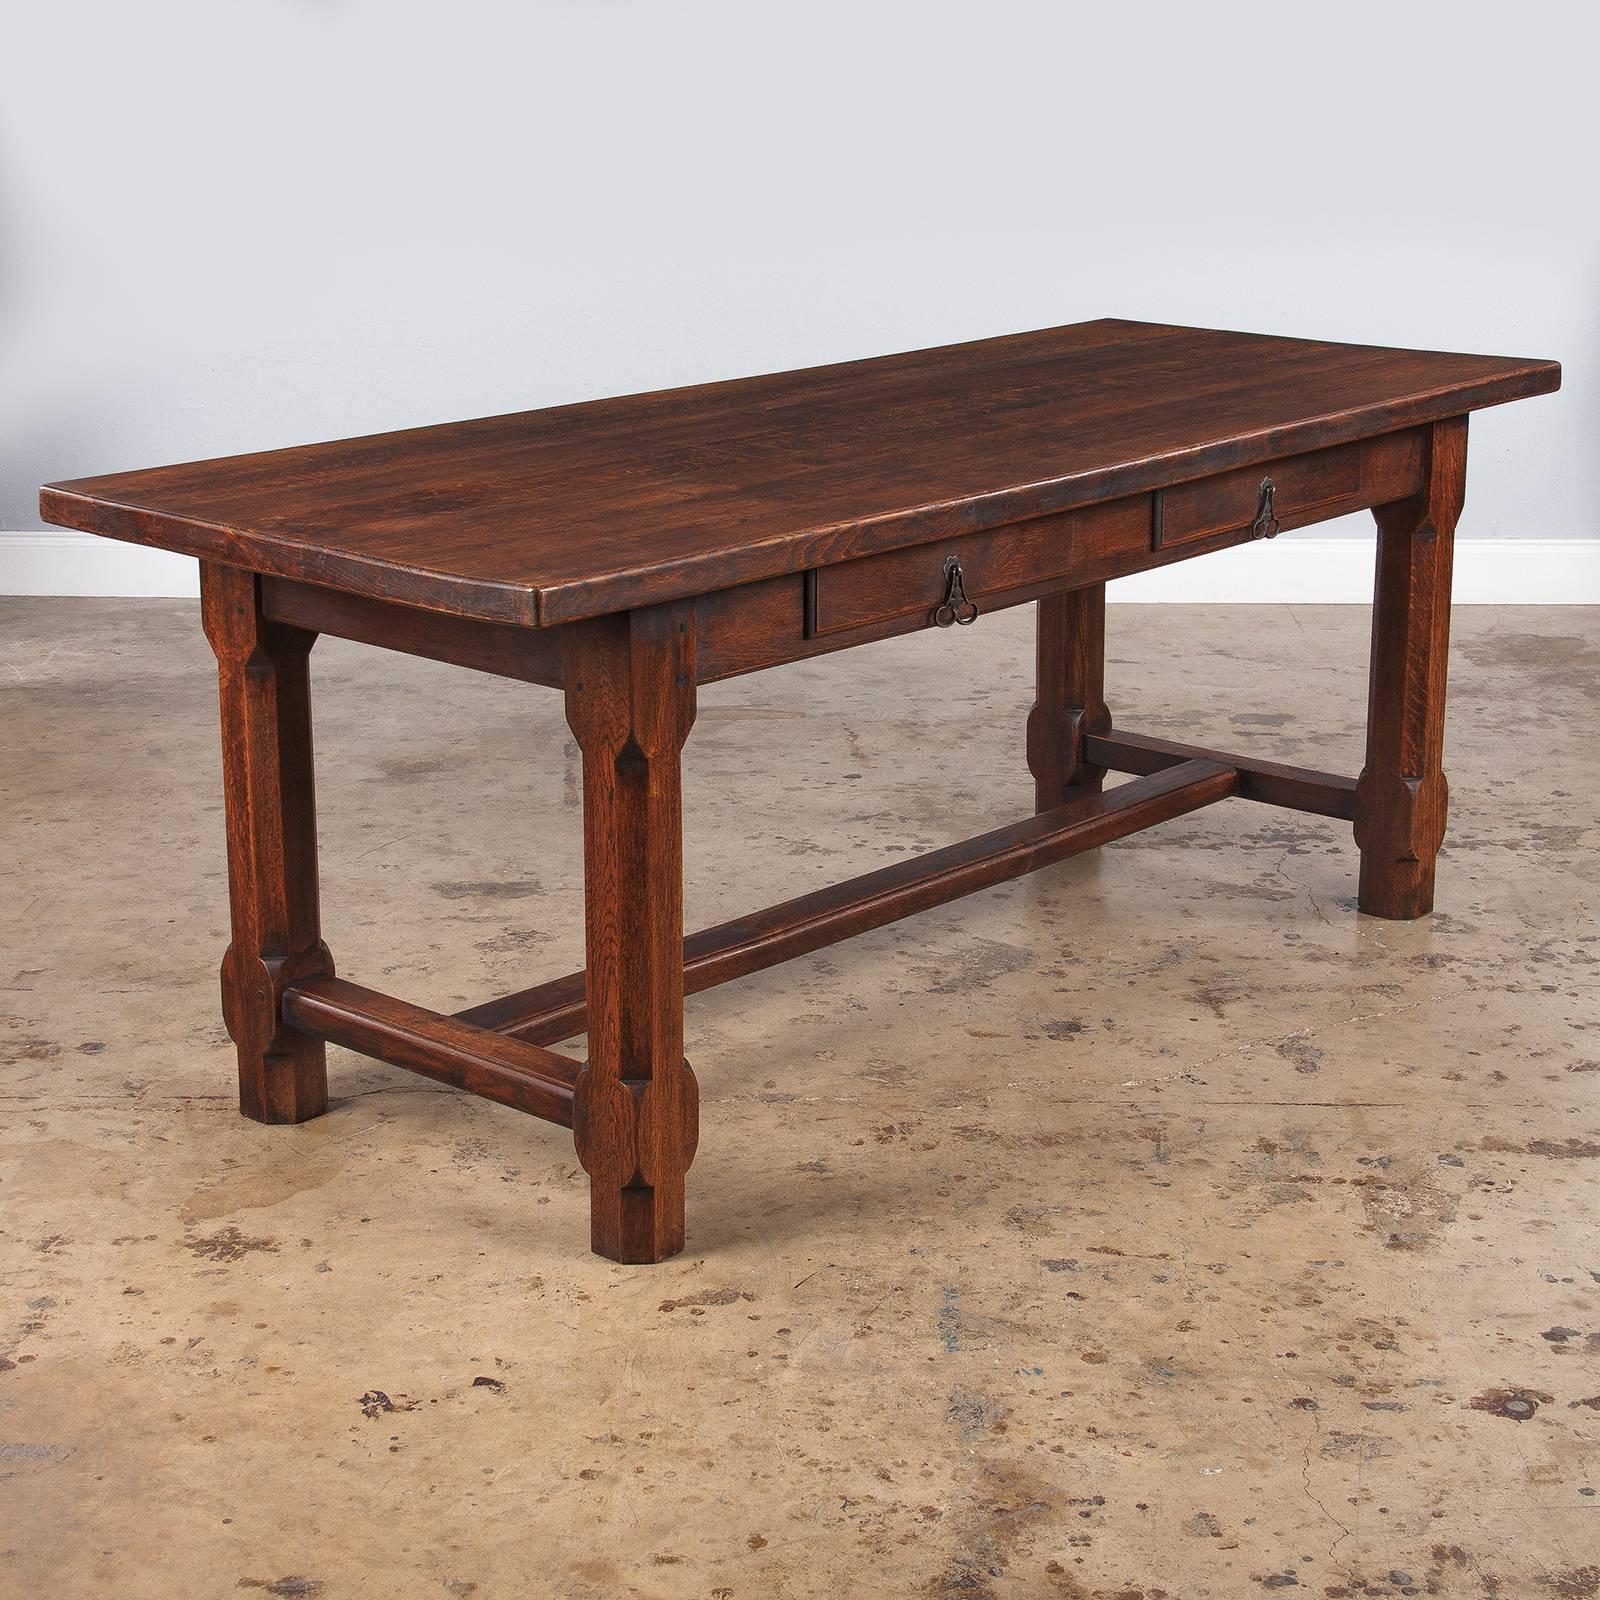 Country French Oak Farm Table or Desk, Early 1900s (Französische Provence)